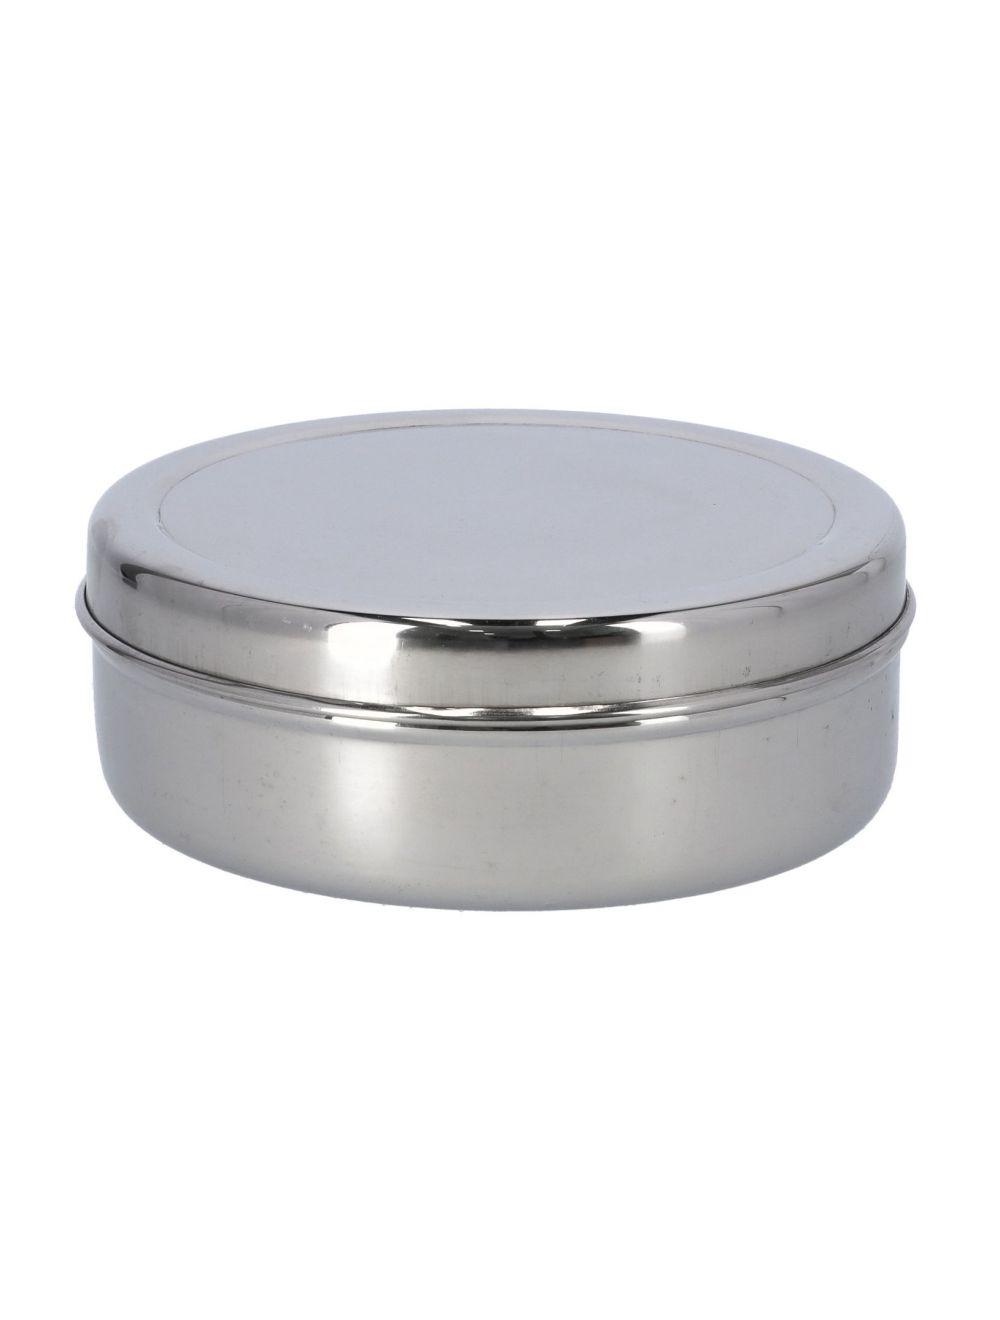 Delcasa 16.5 Cm Stainless Steel Lunch Box - Leak-Proof & Airtight Lid Round Food Storage Container